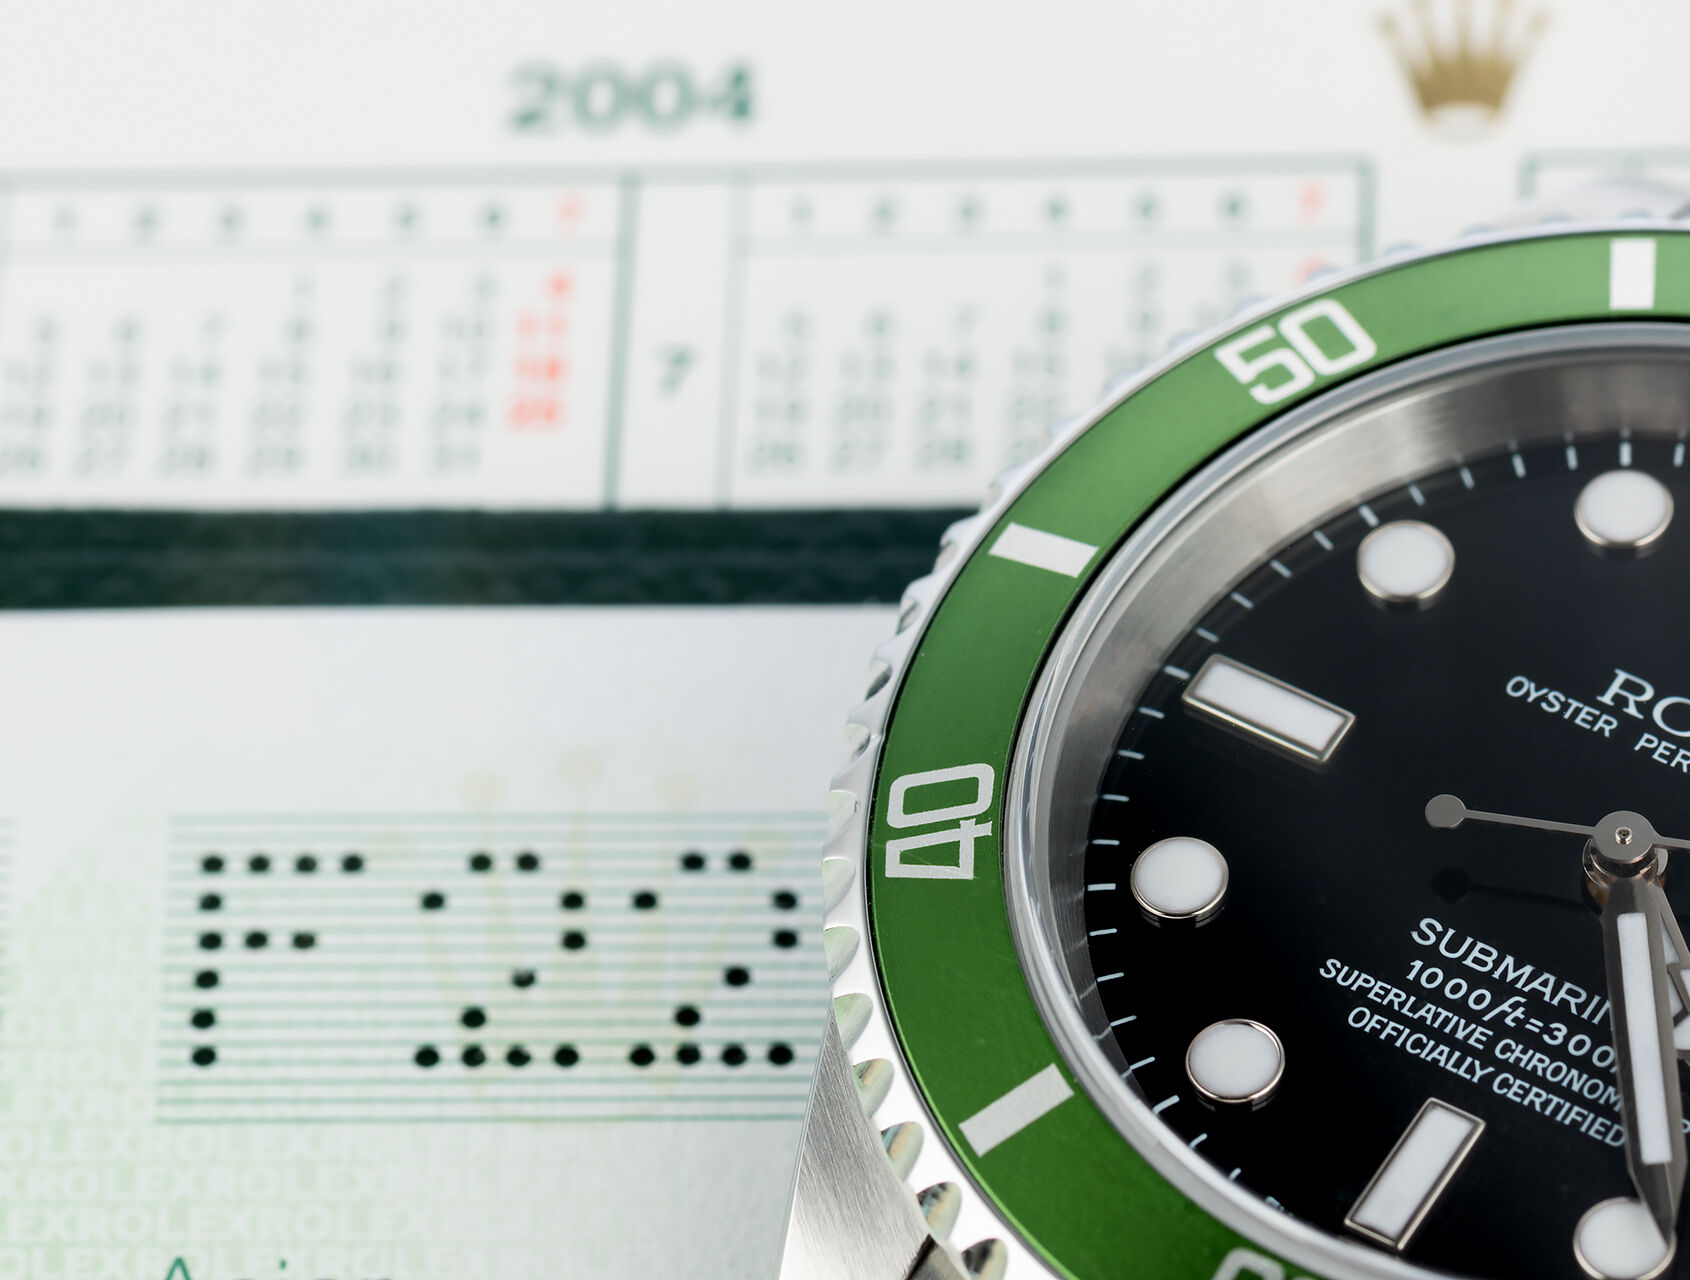 ref 16610LV | 'Early F Series' Olive bezel | Rolex Submariner Date